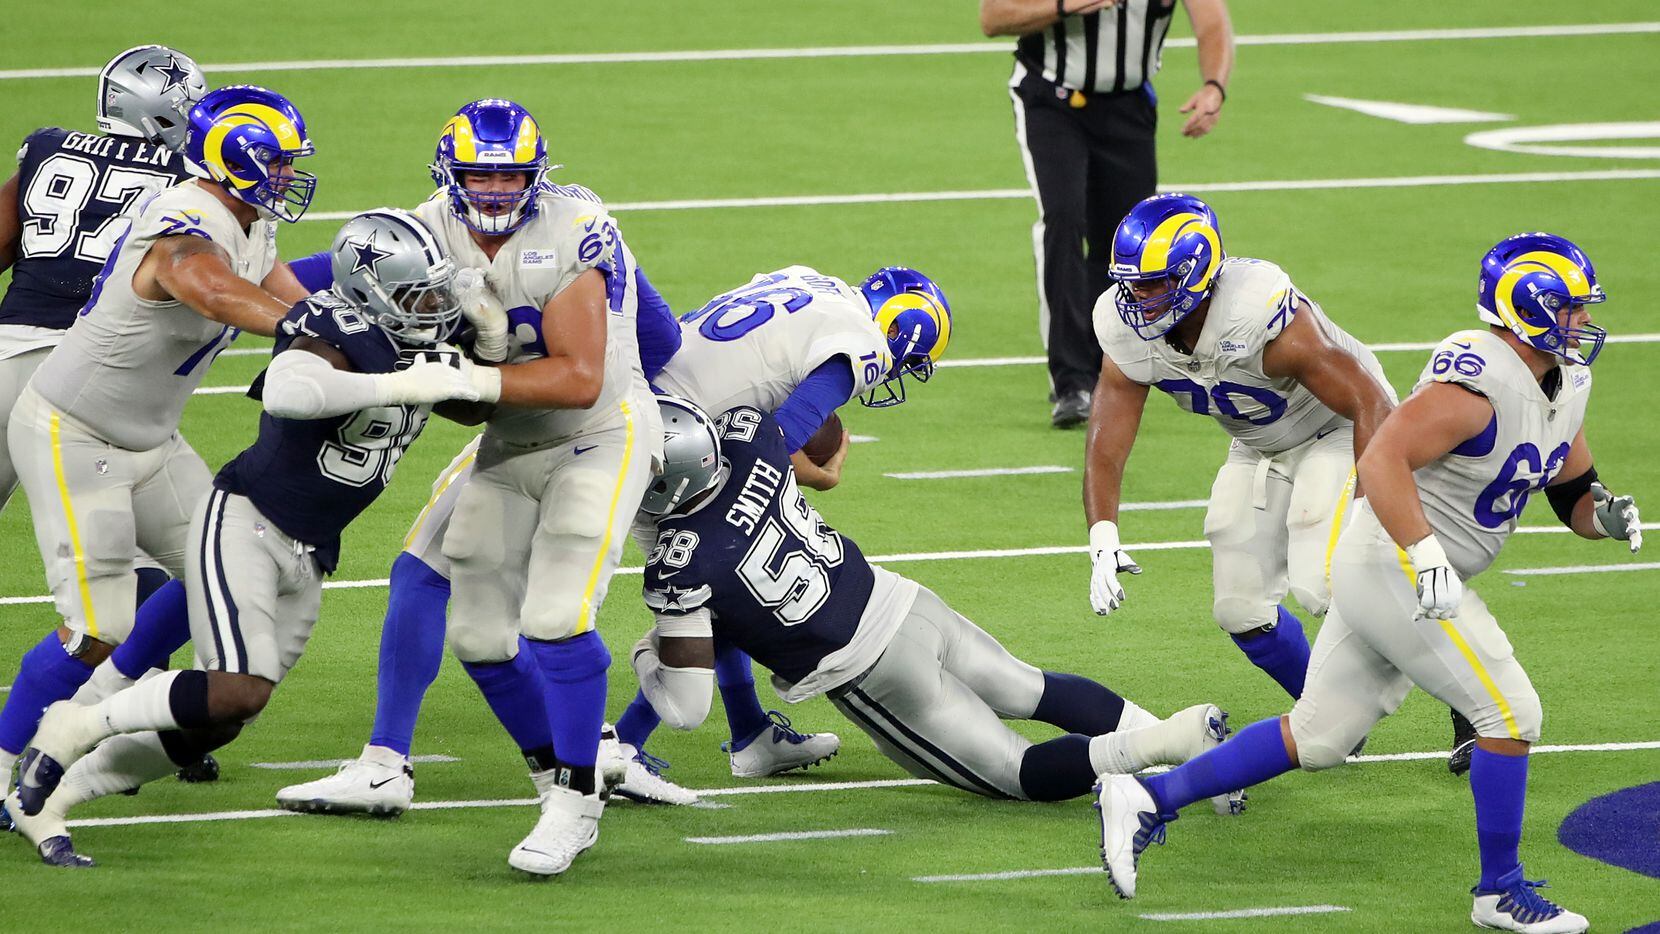 Aldon Smith #58 of the Dallas Cowboys sacks Jared Goff #16 of the Los Angeles Rams during...